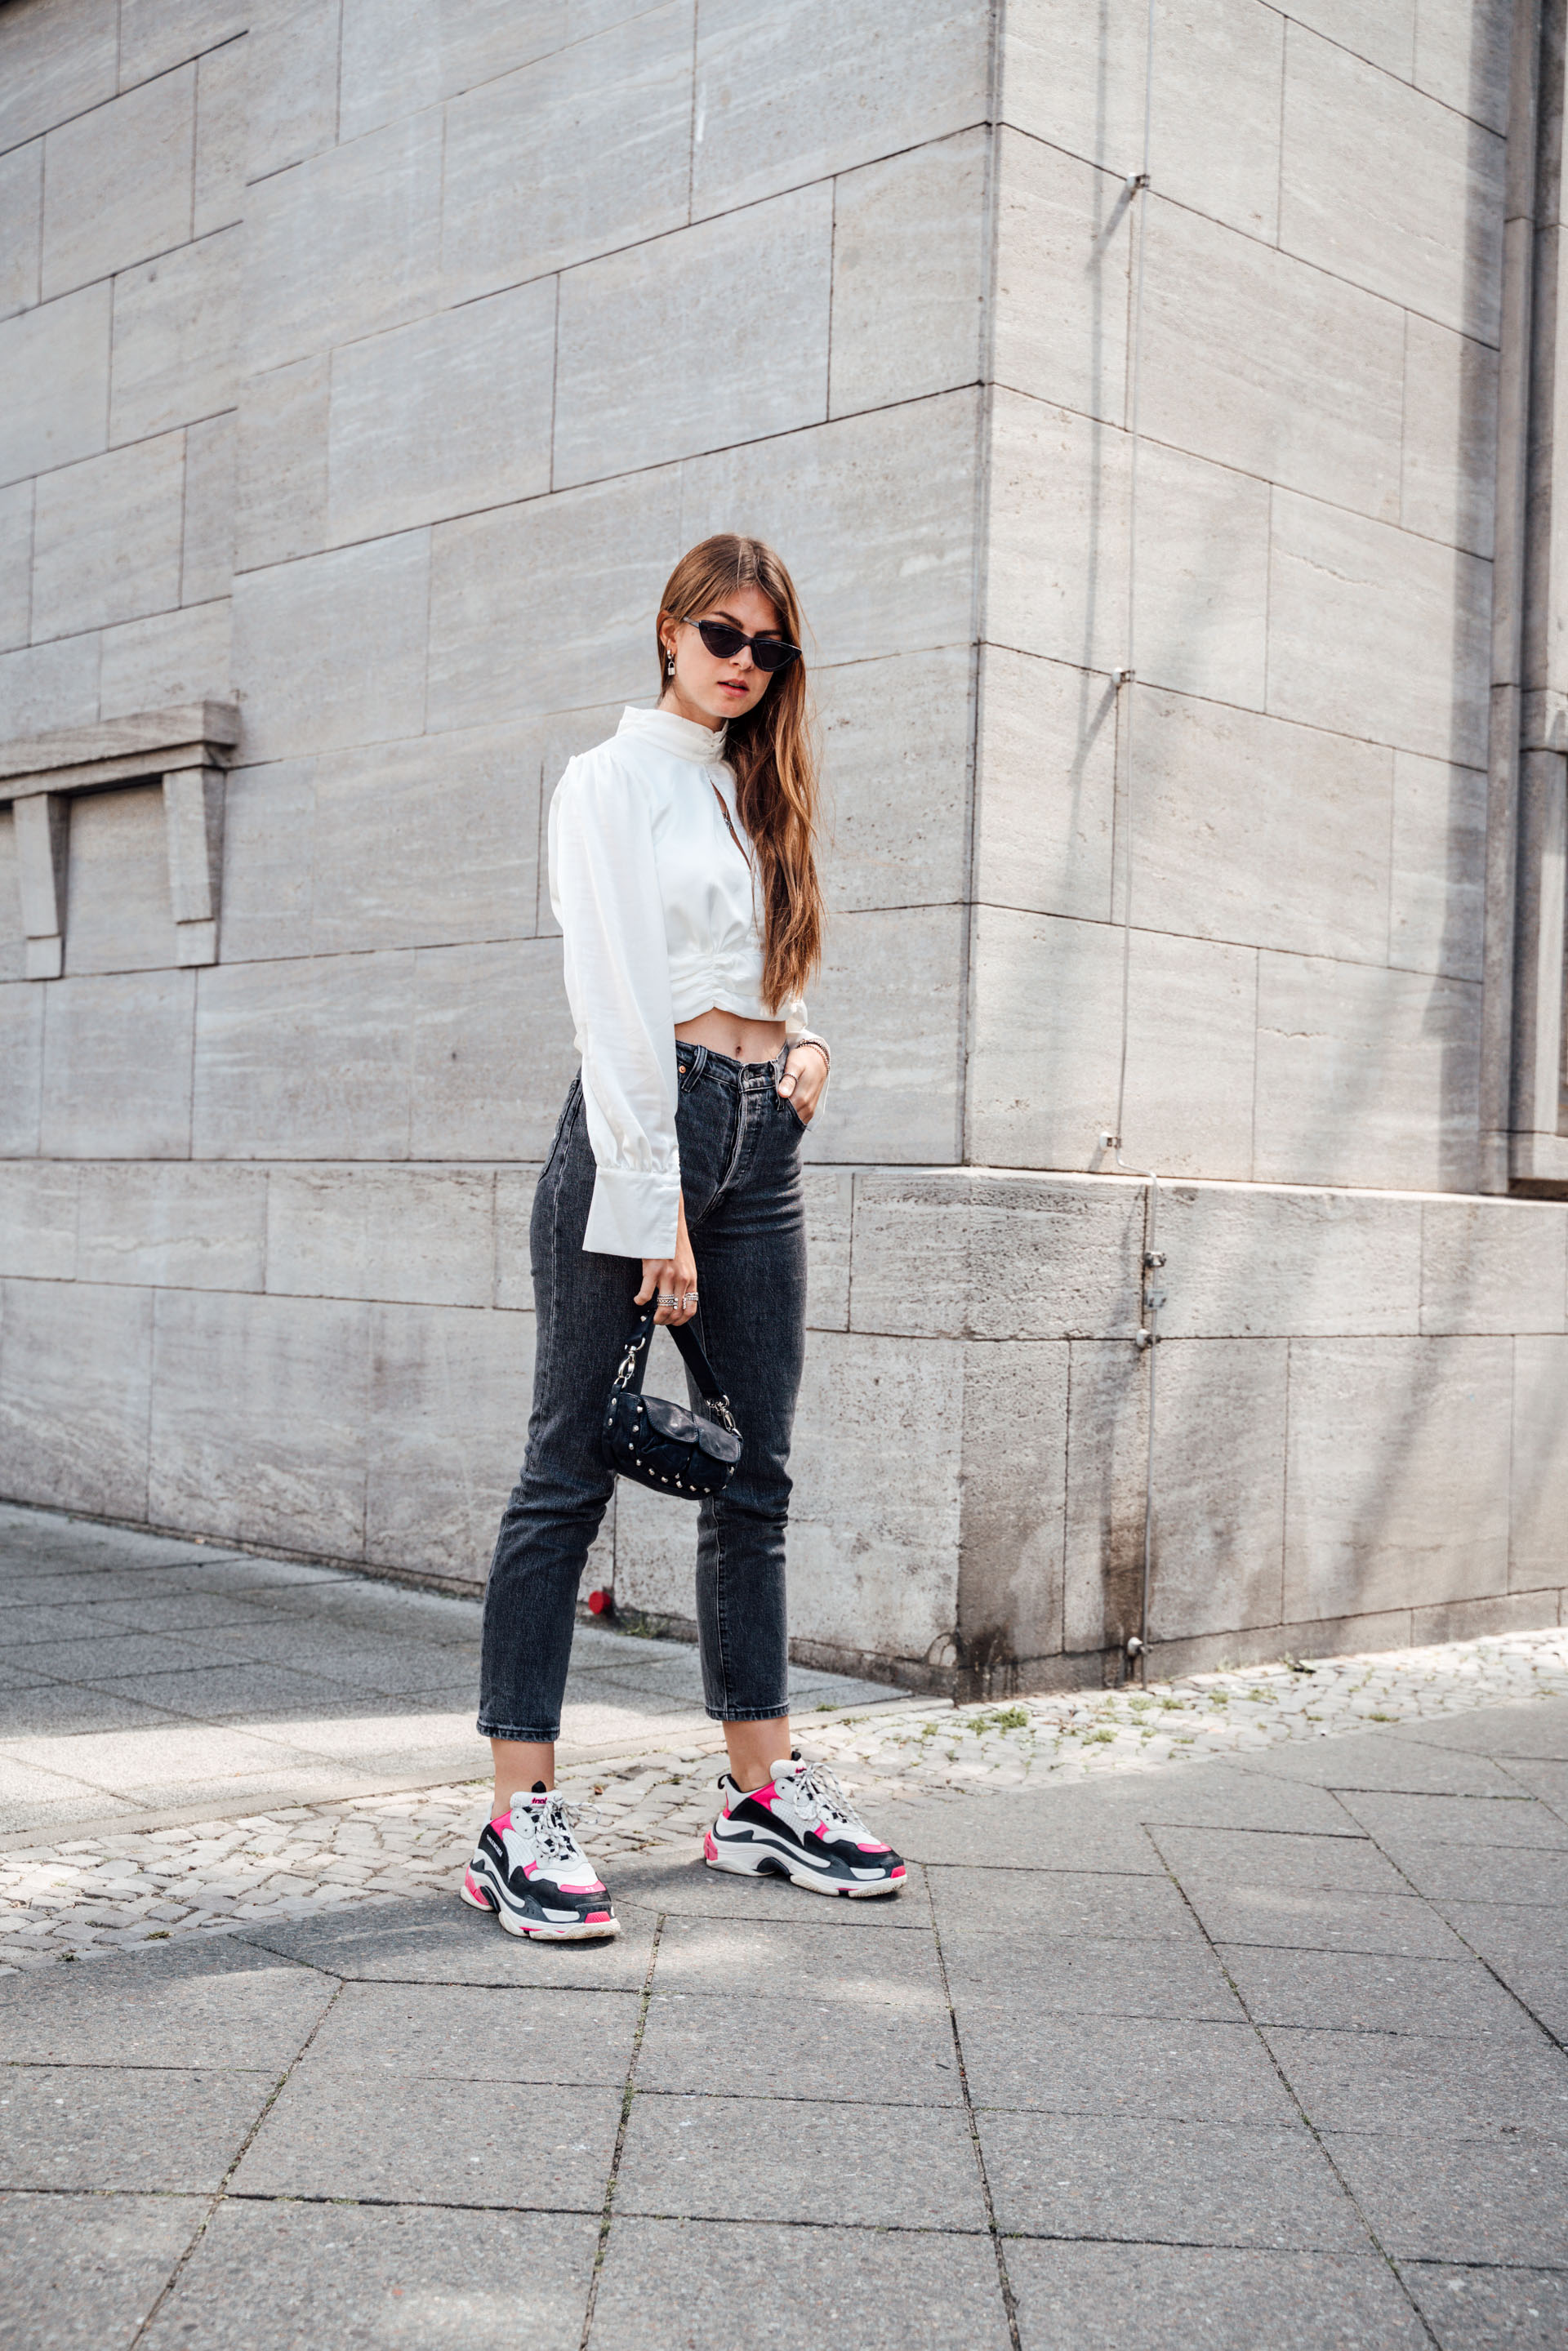 Styling a satin blouse in a casual way || Fashionblog Berlin